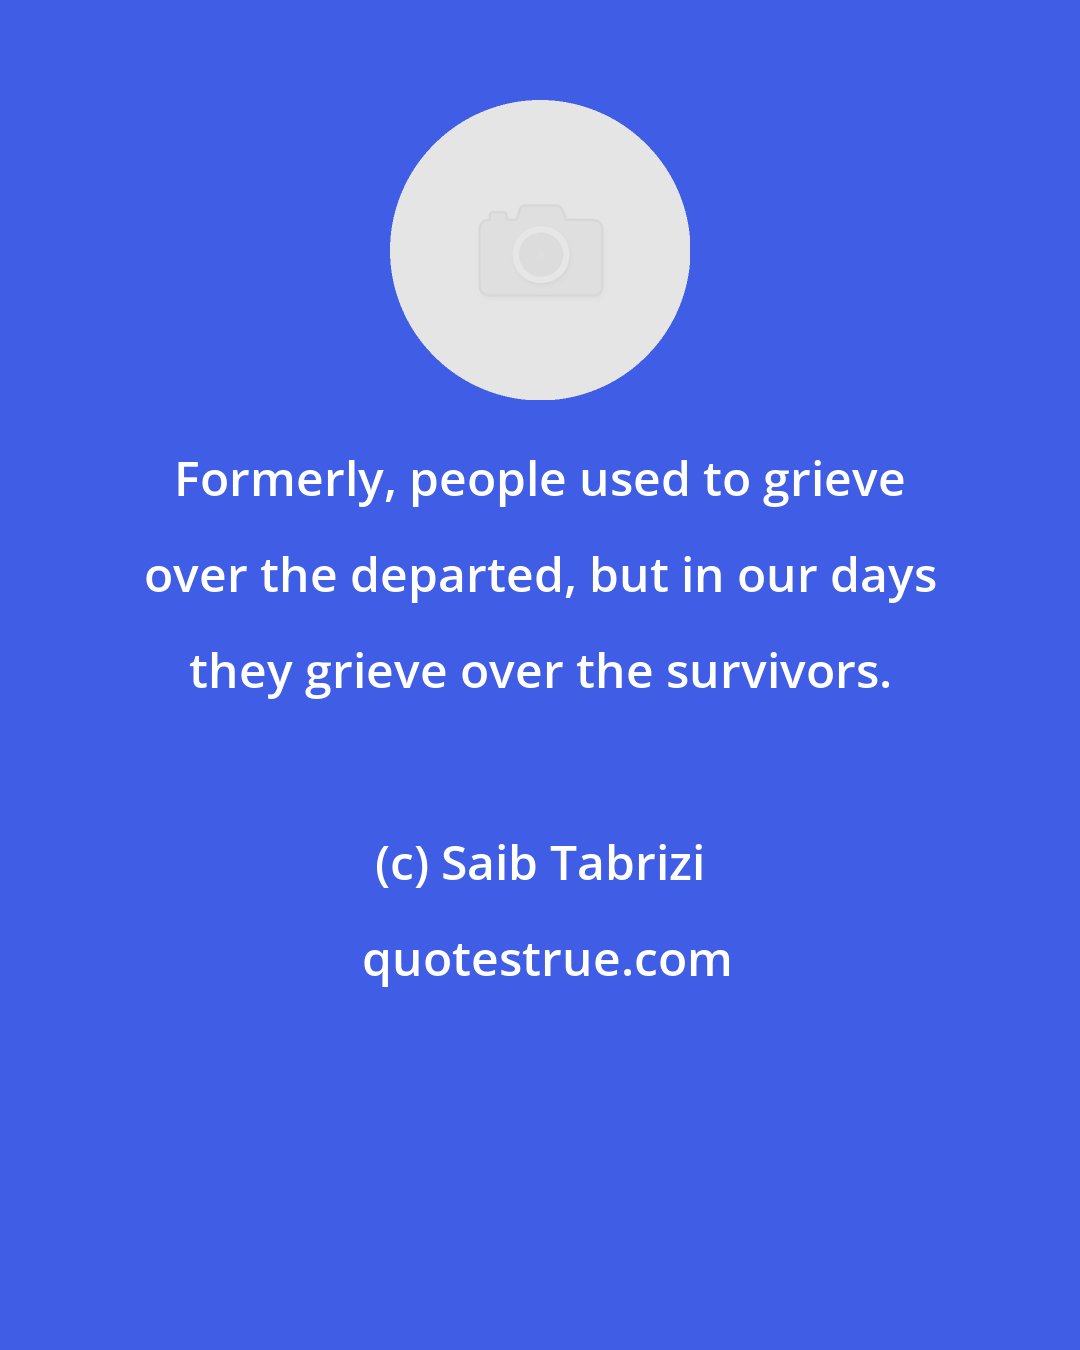 Saib Tabrizi: Formerly, people used to grieve over the departed, but in our days they grieve over the survivors.